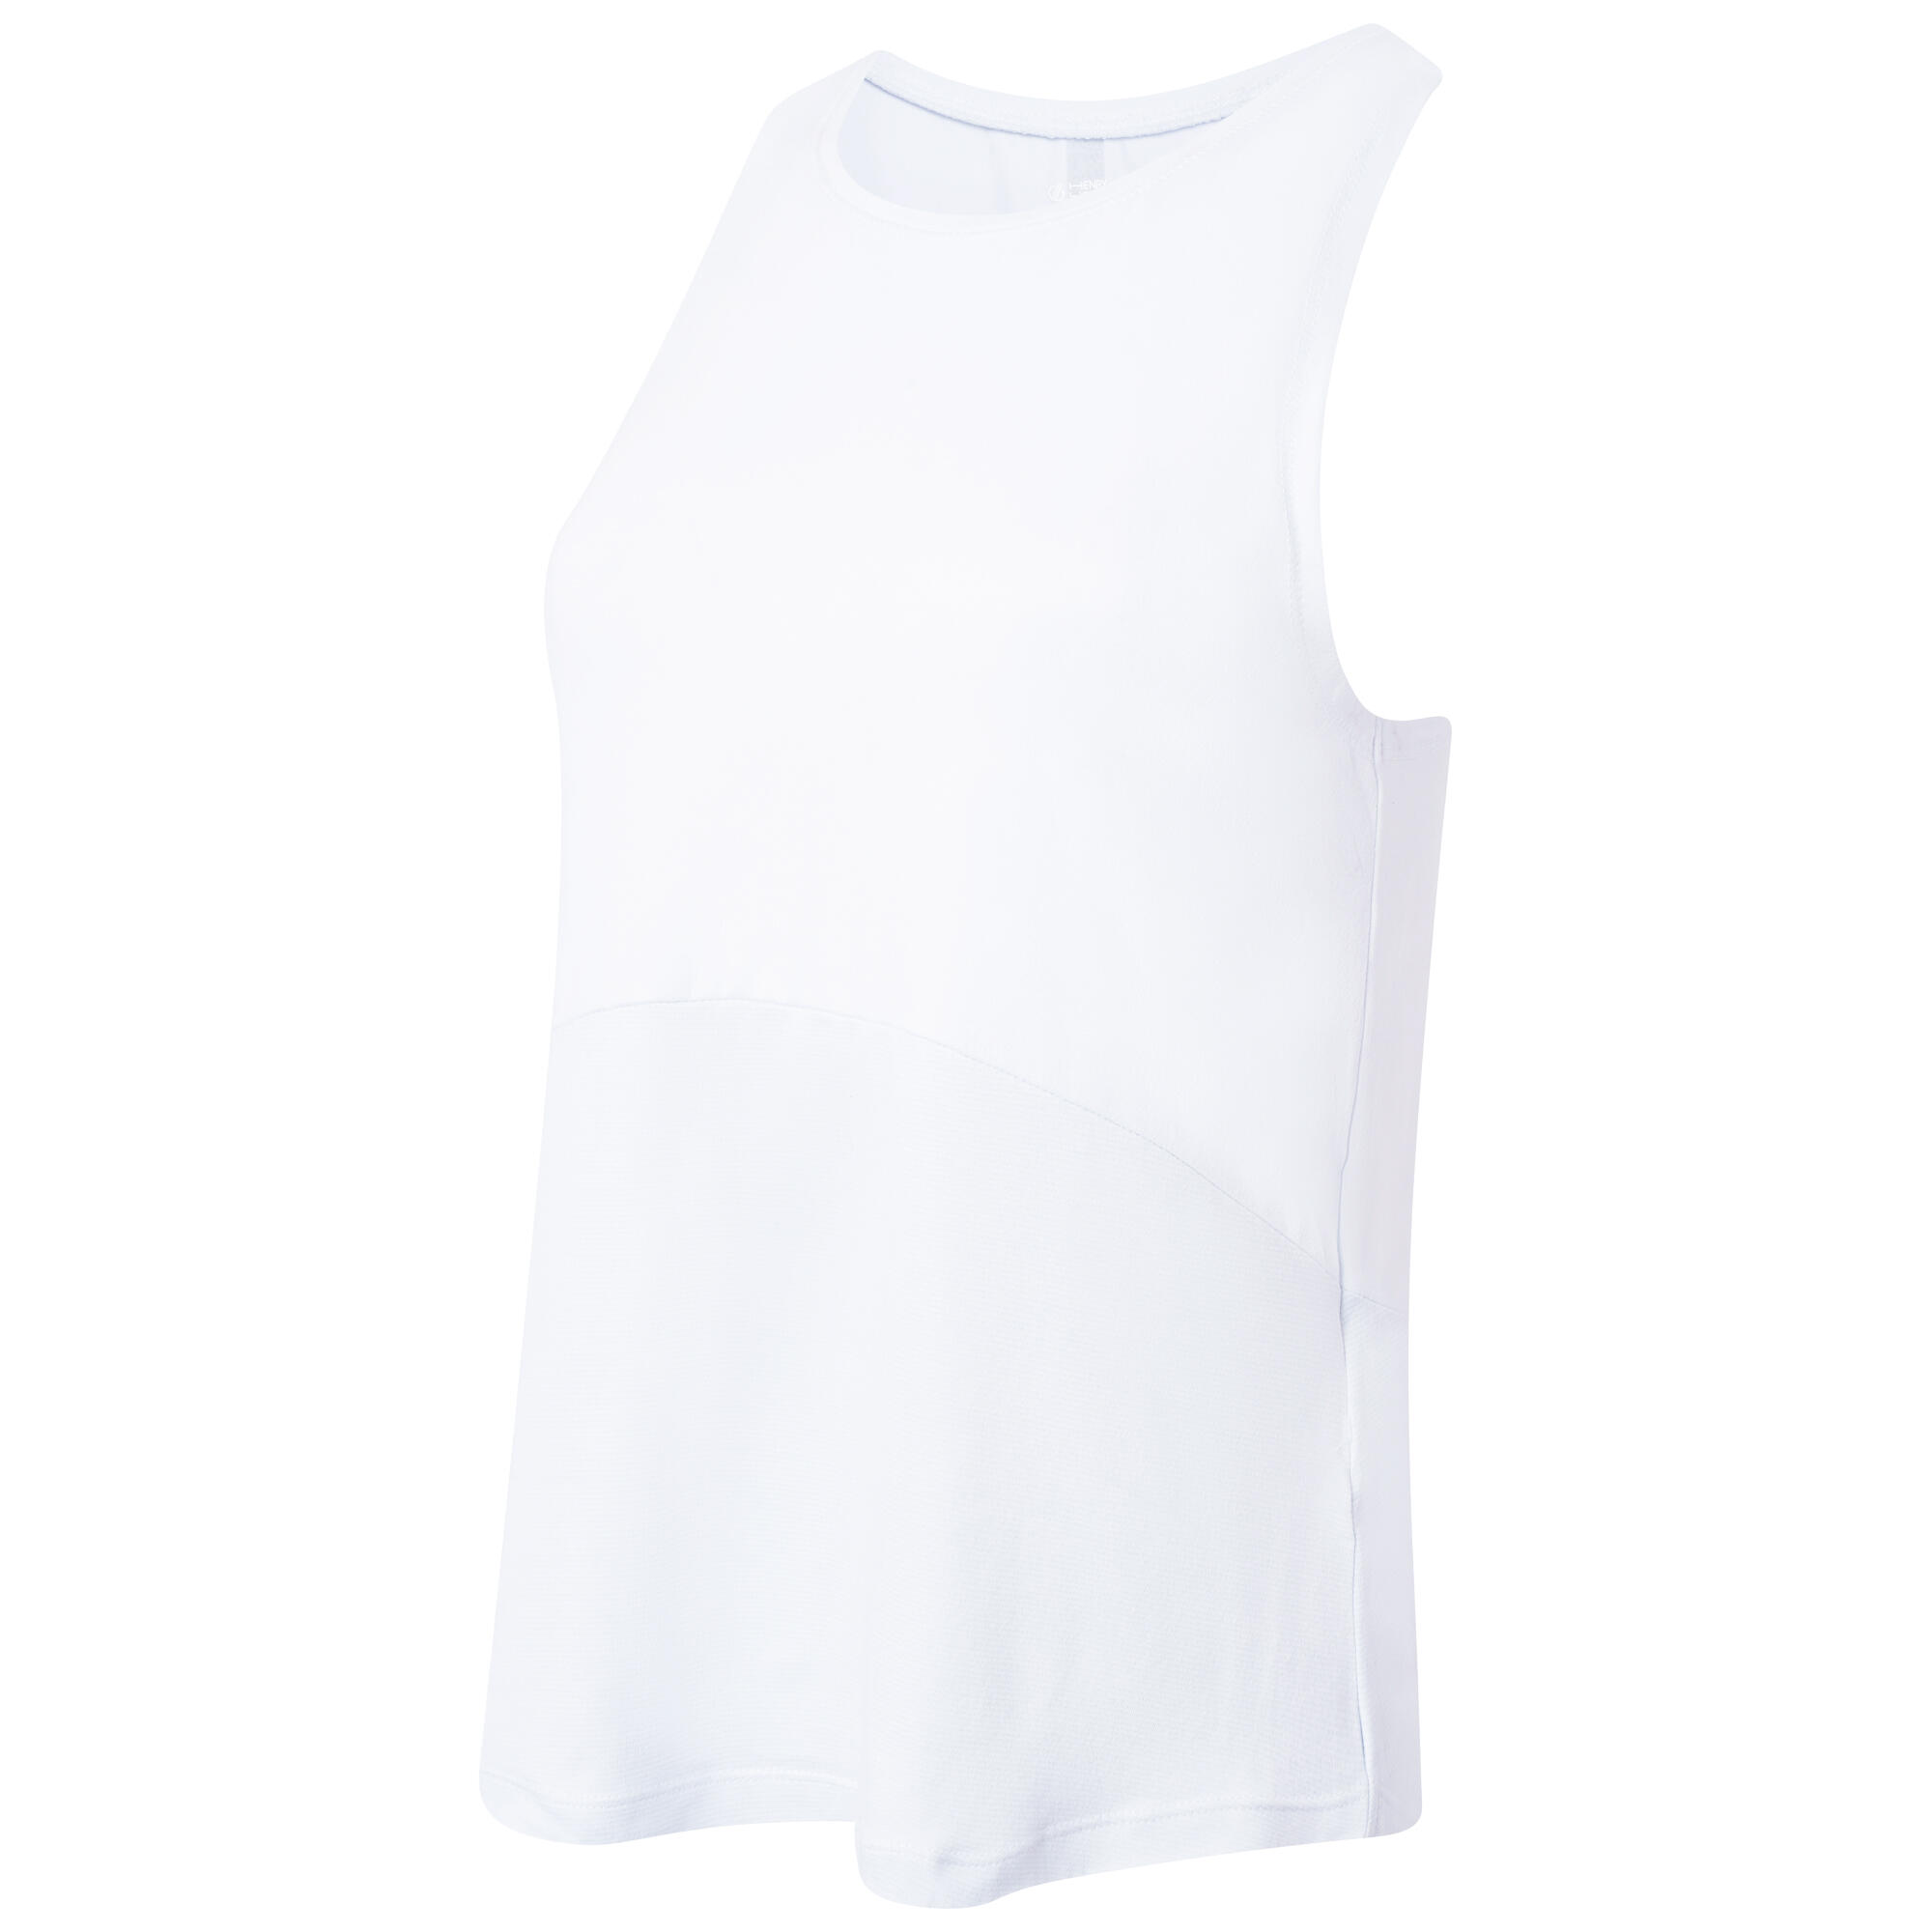 Henry Holland Cut Loose Womens Gym Vest - White 2/5